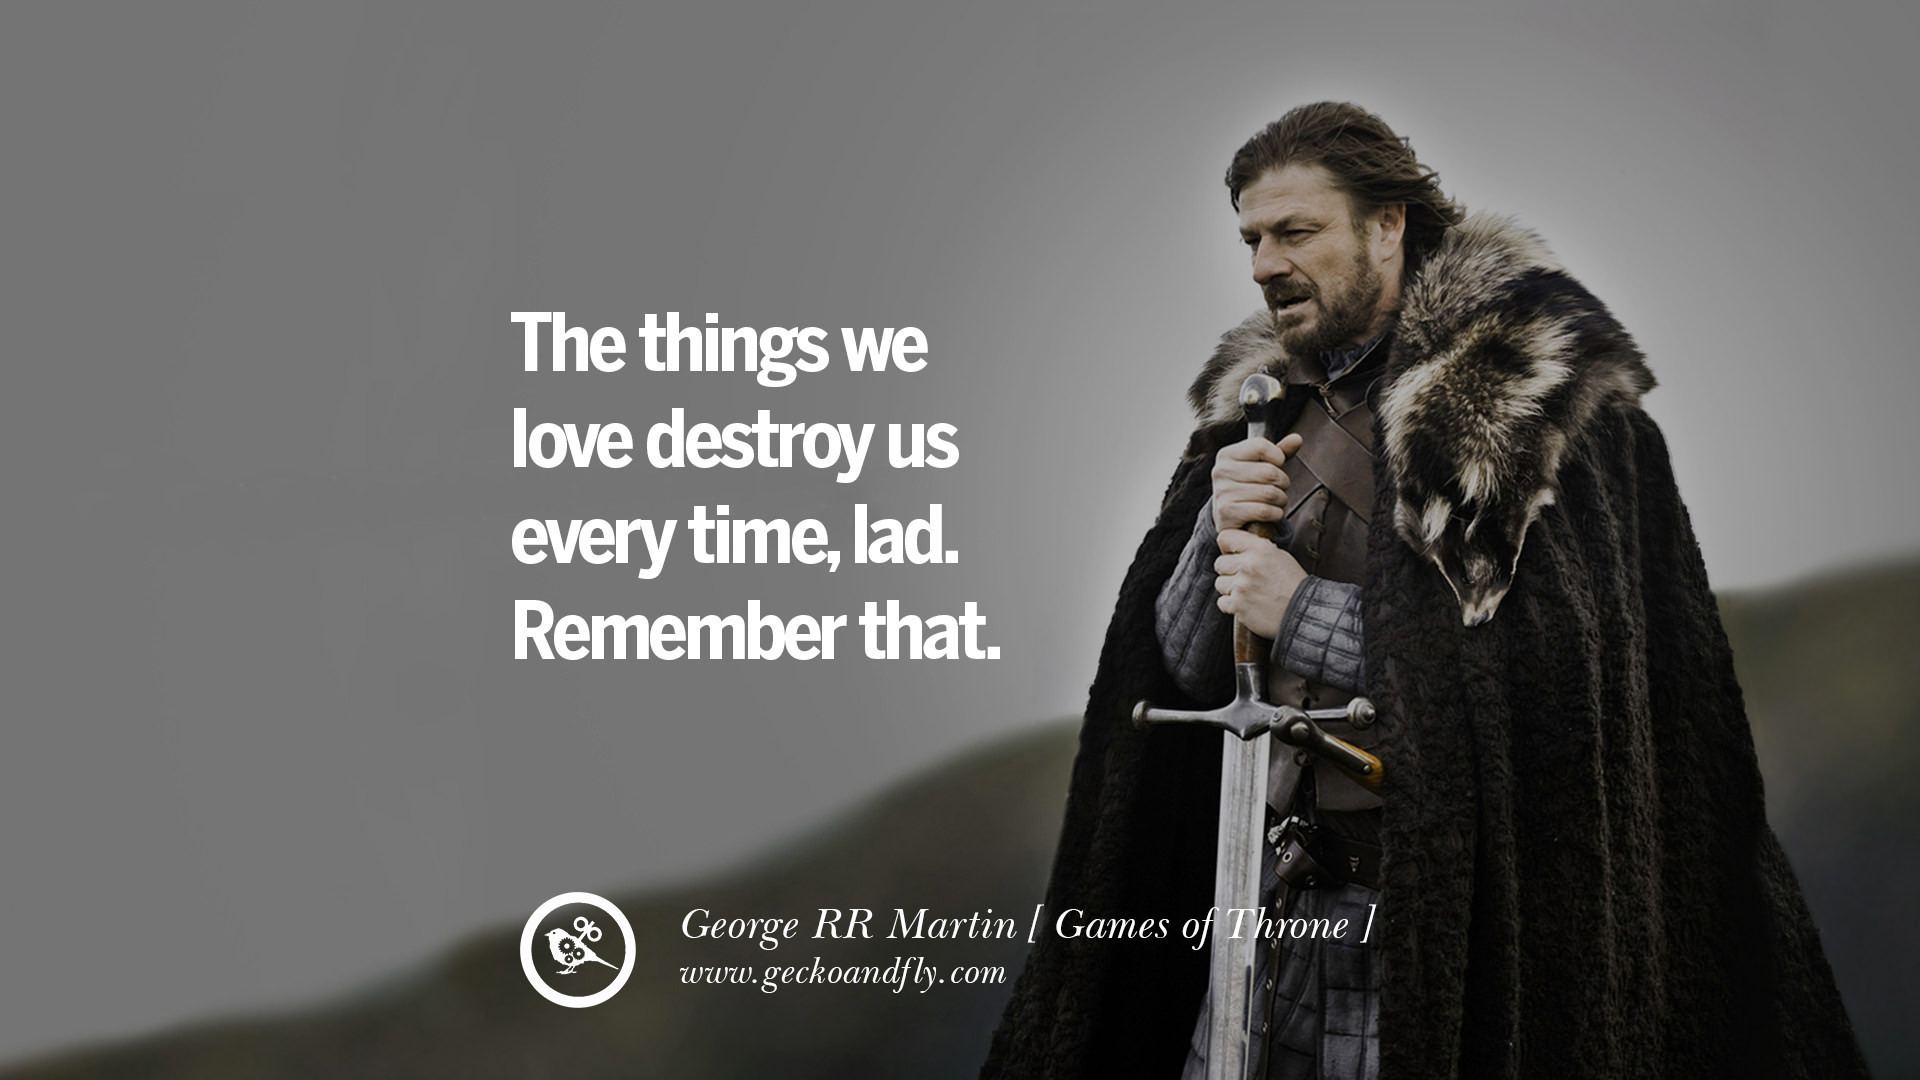 Game Of Thrones Romantic Quotes
 12 A Game of Thrones Quotes By George RR Martin